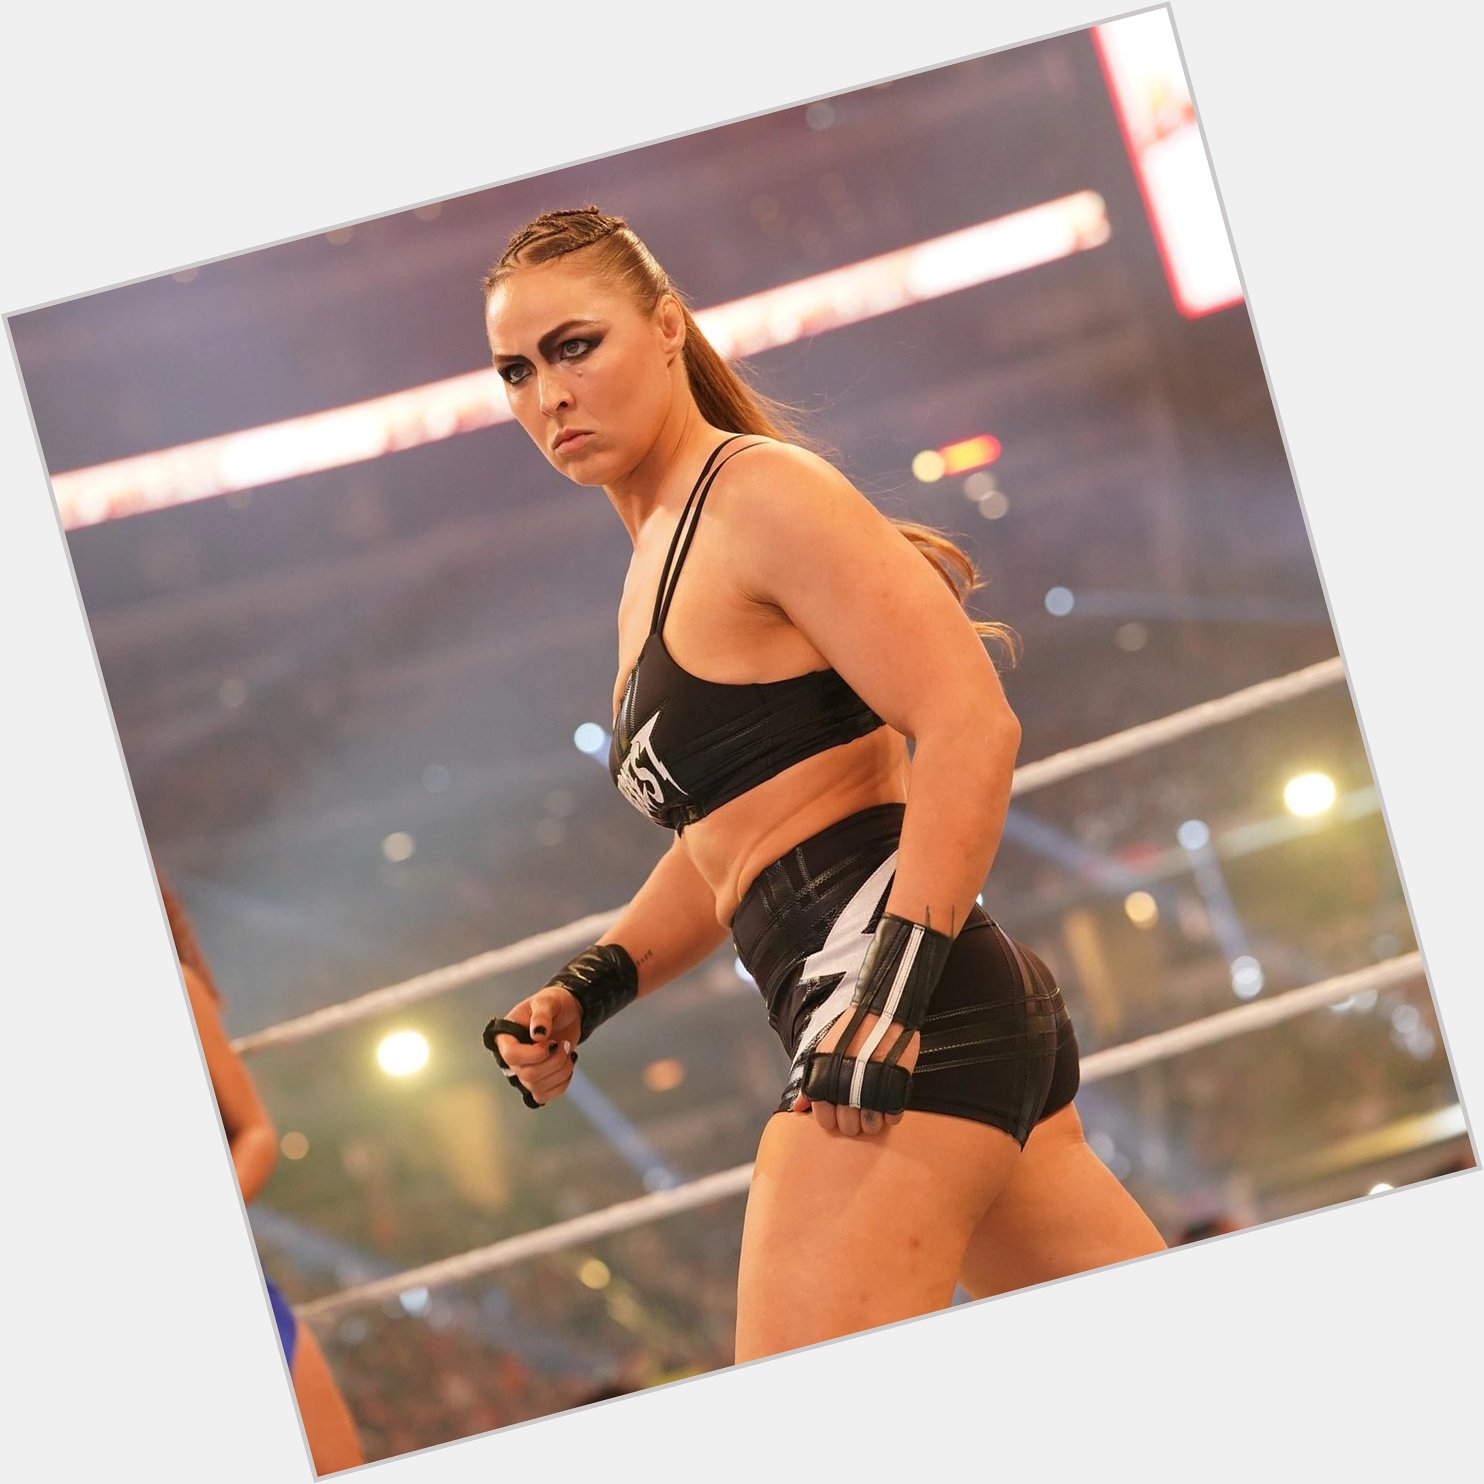   Happy Birthday to the Baddest Woman on the Planet! Rowdy Ronda Rousey!! 